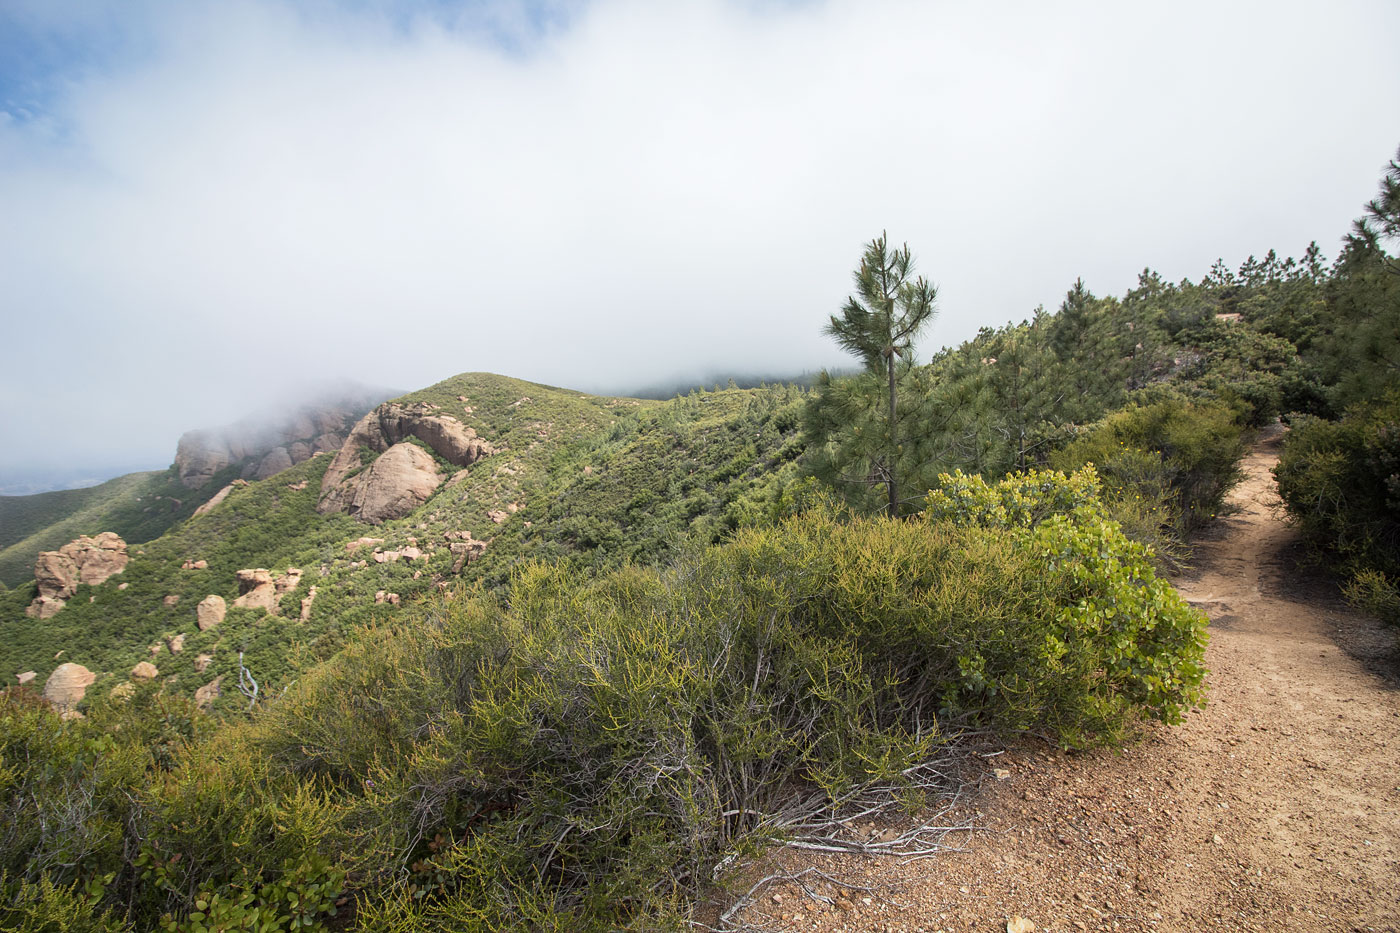 Hike Machesna Mountain in Los Padres National Forest, California - Stav is Lost